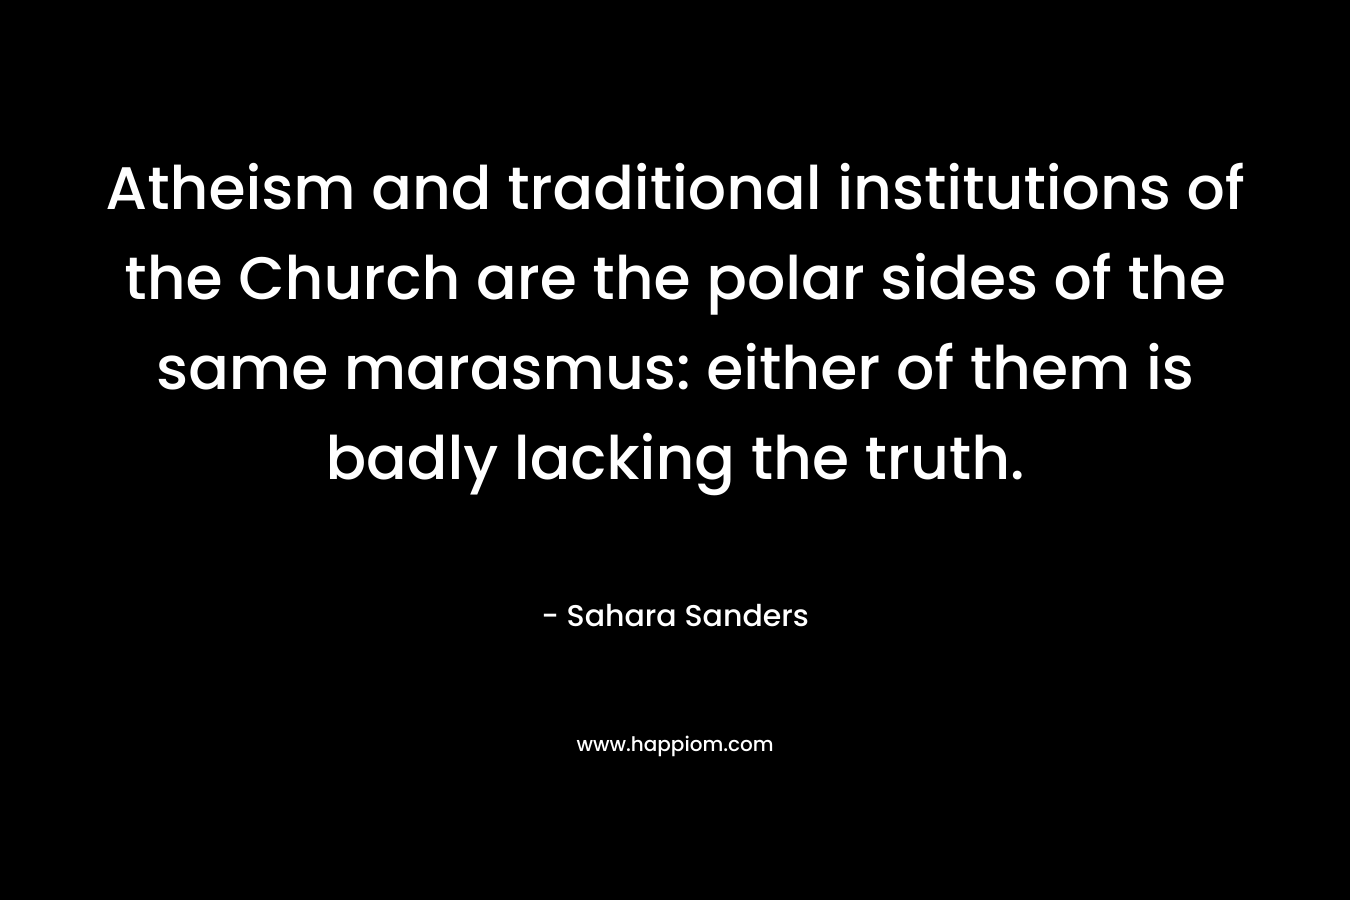 Atheism and traditional institutions of the Church are the polar sides of the same marasmus: either of them is badly lacking the truth. – Sahara Sanders